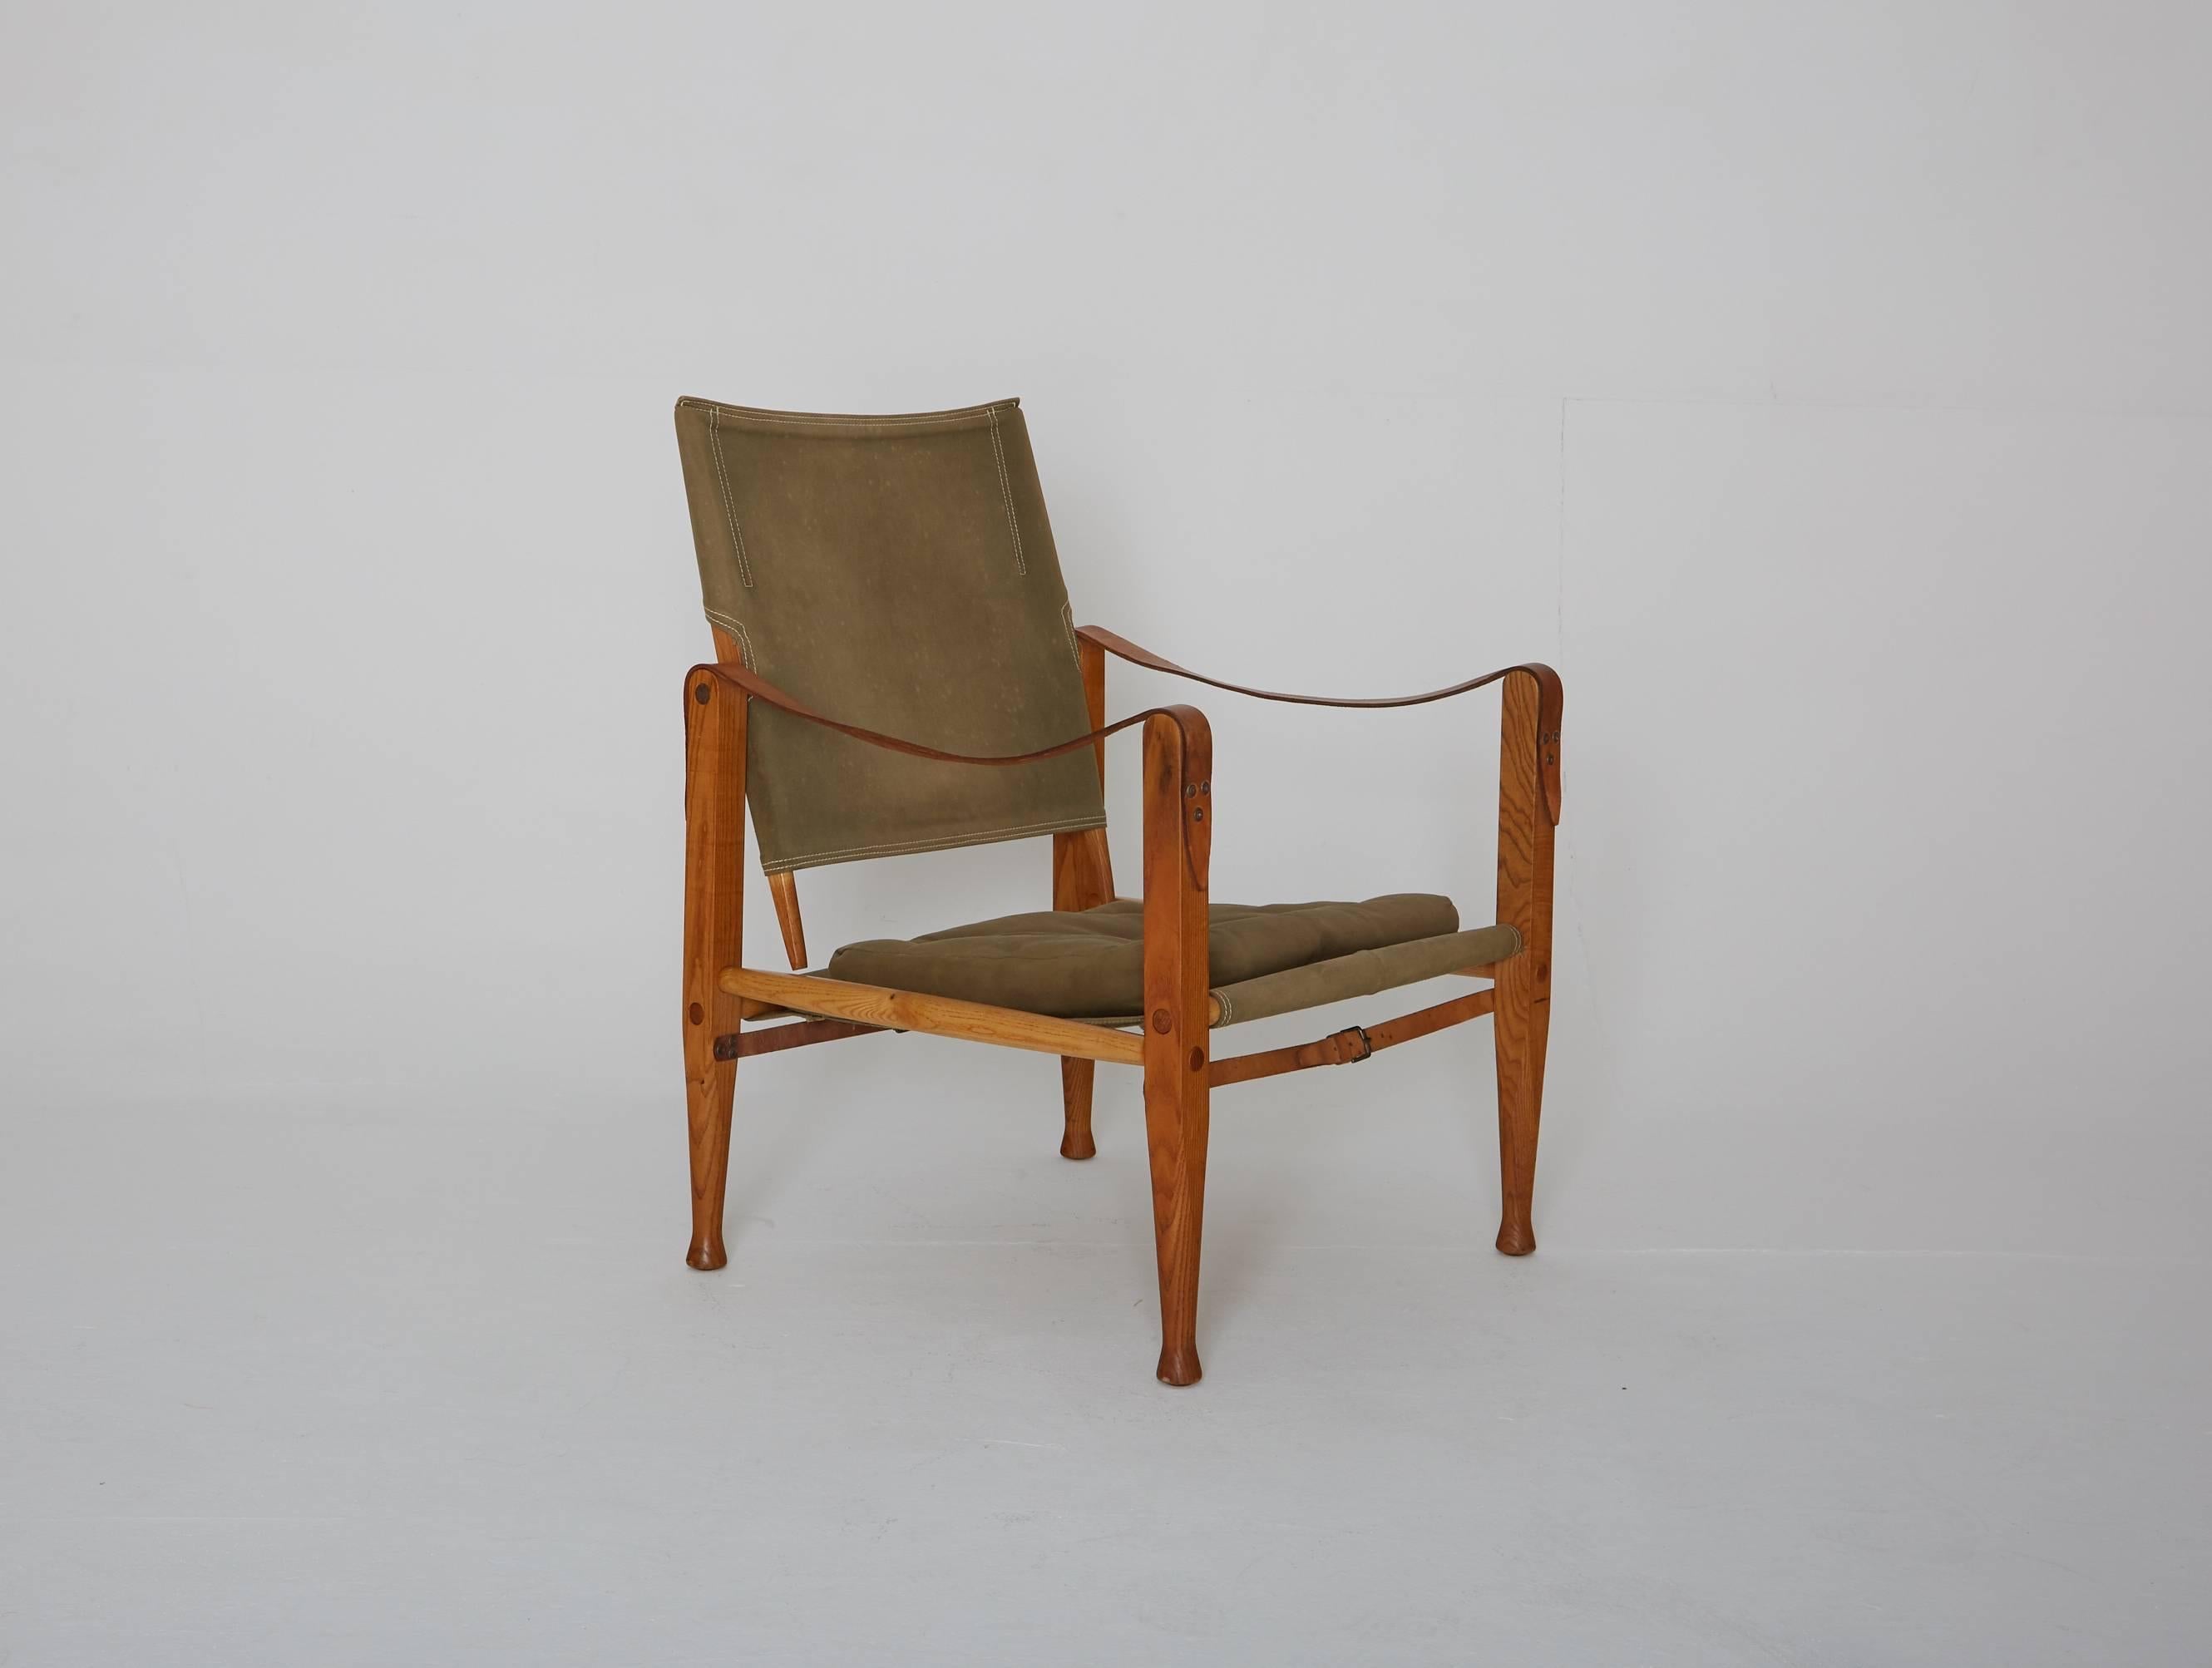 A Kaare Klint safari chair, made by Rud Rasmussen, Denmark, 1960s. Original faded khaki canvas and ashwood. Some water marks and spots to canvas.